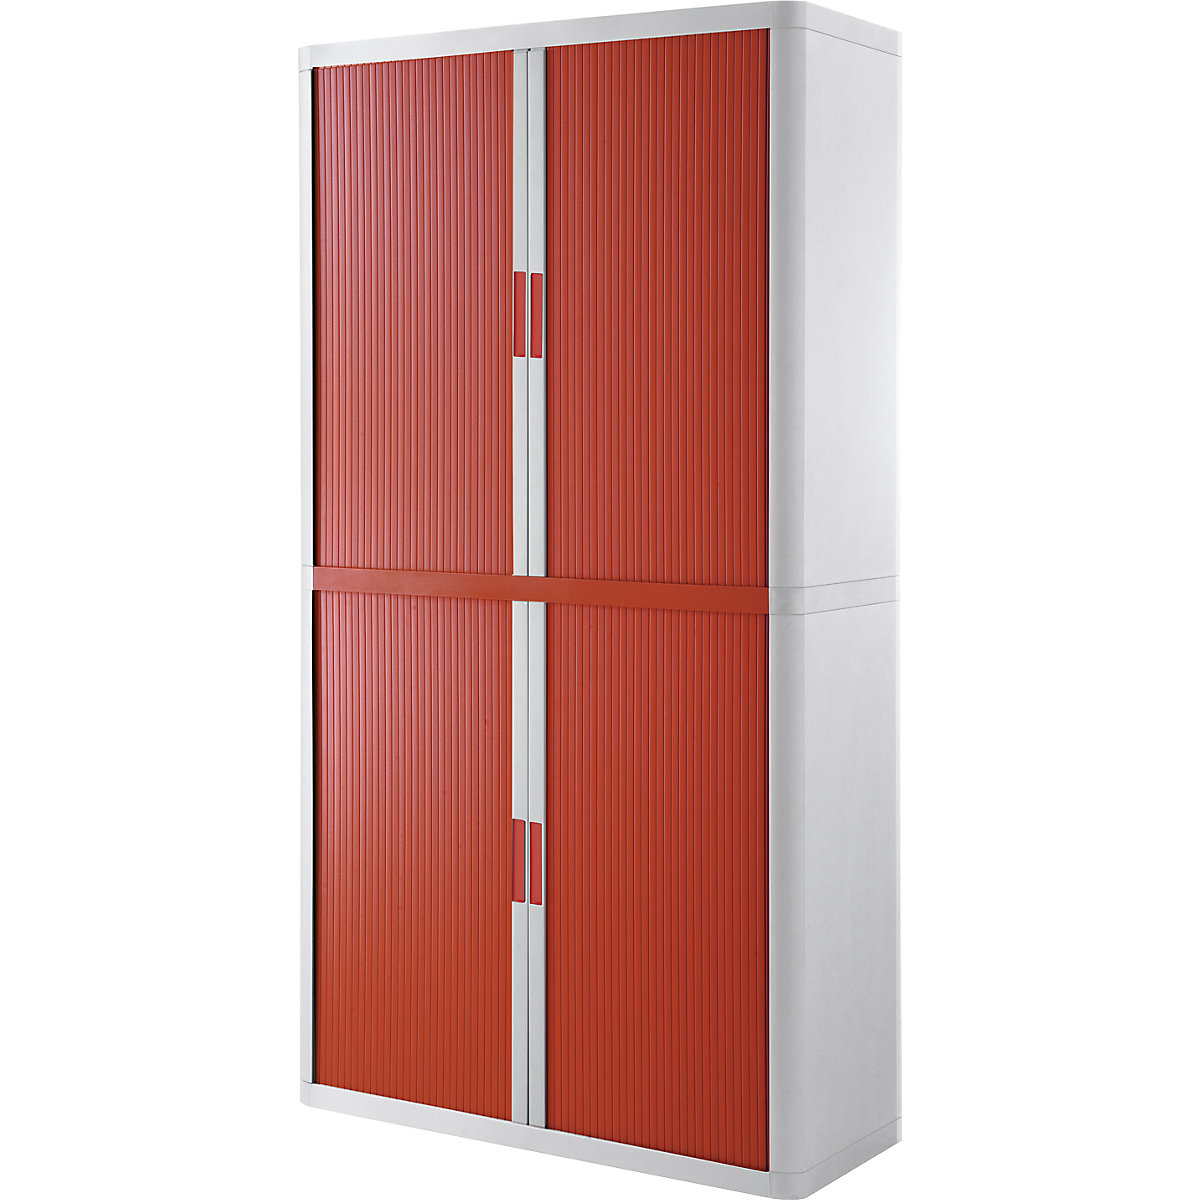 easyOffice® roller shutter cupboard – Paperflow, 4 shelves, height 2040 mm, white / red-8